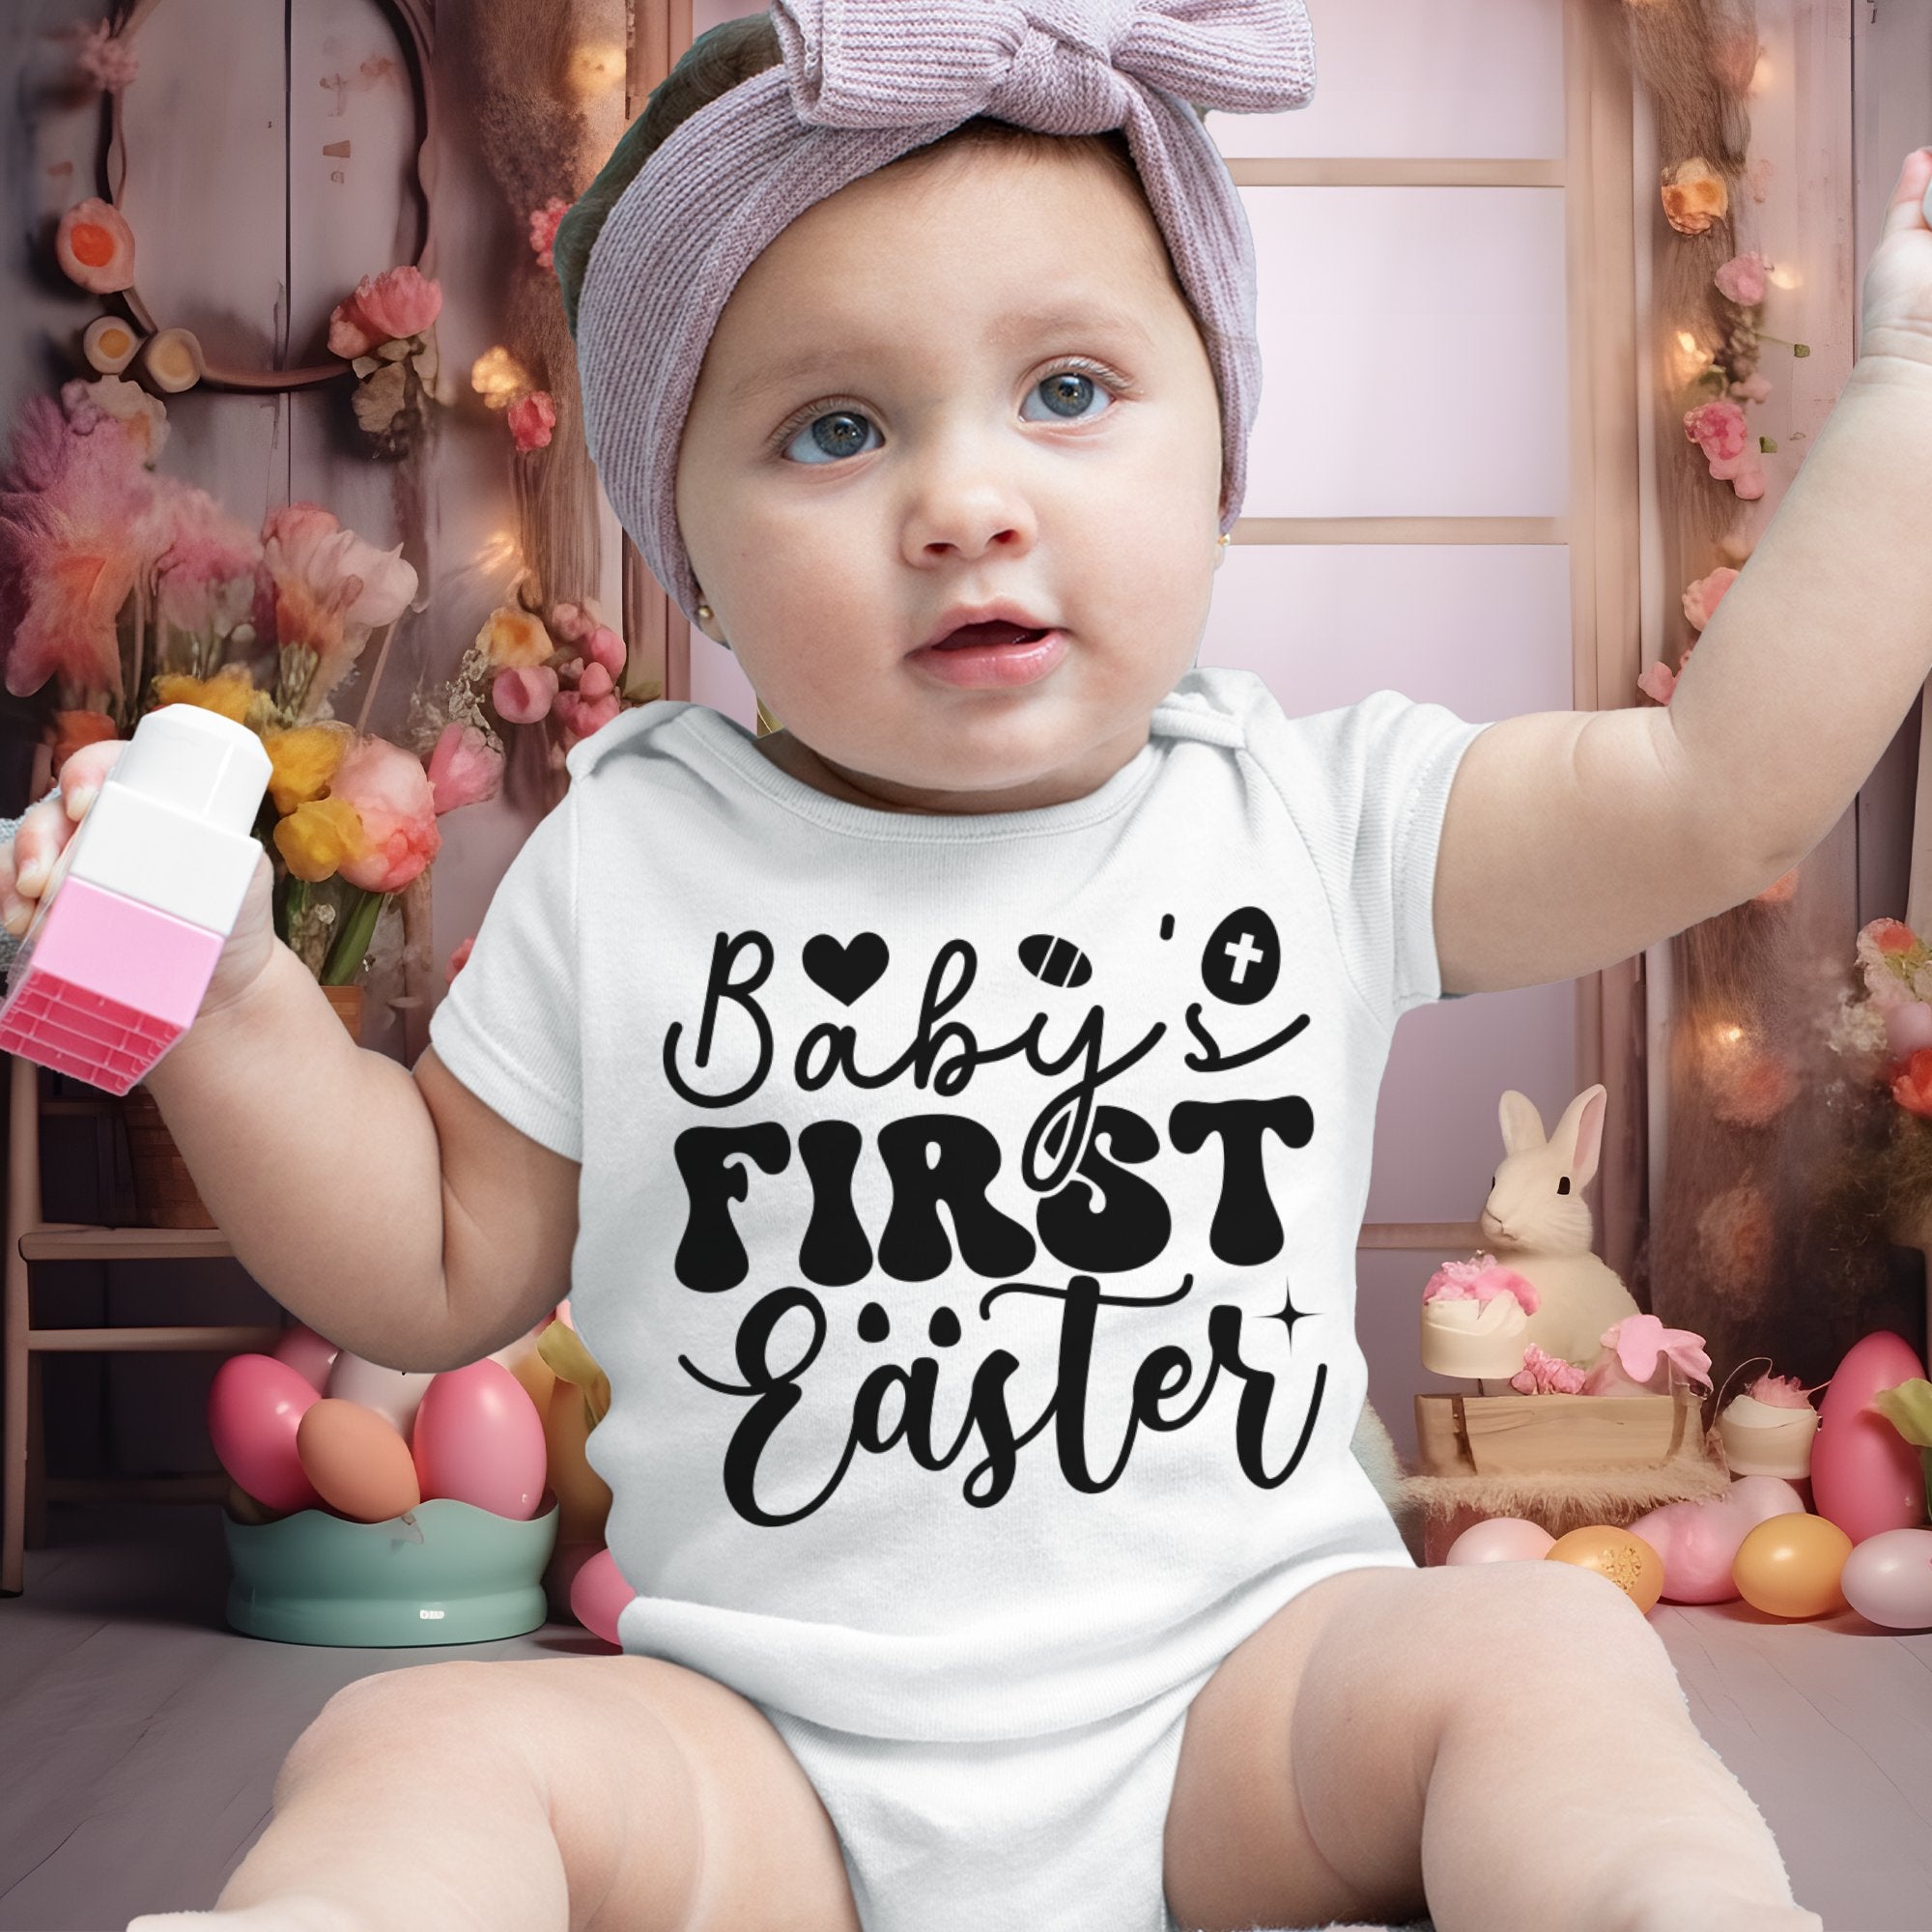 Baby's First Easter Retro Infant Fine Jersey Bodysuit Size: 6mo Color: White Jesus Passion Apparel